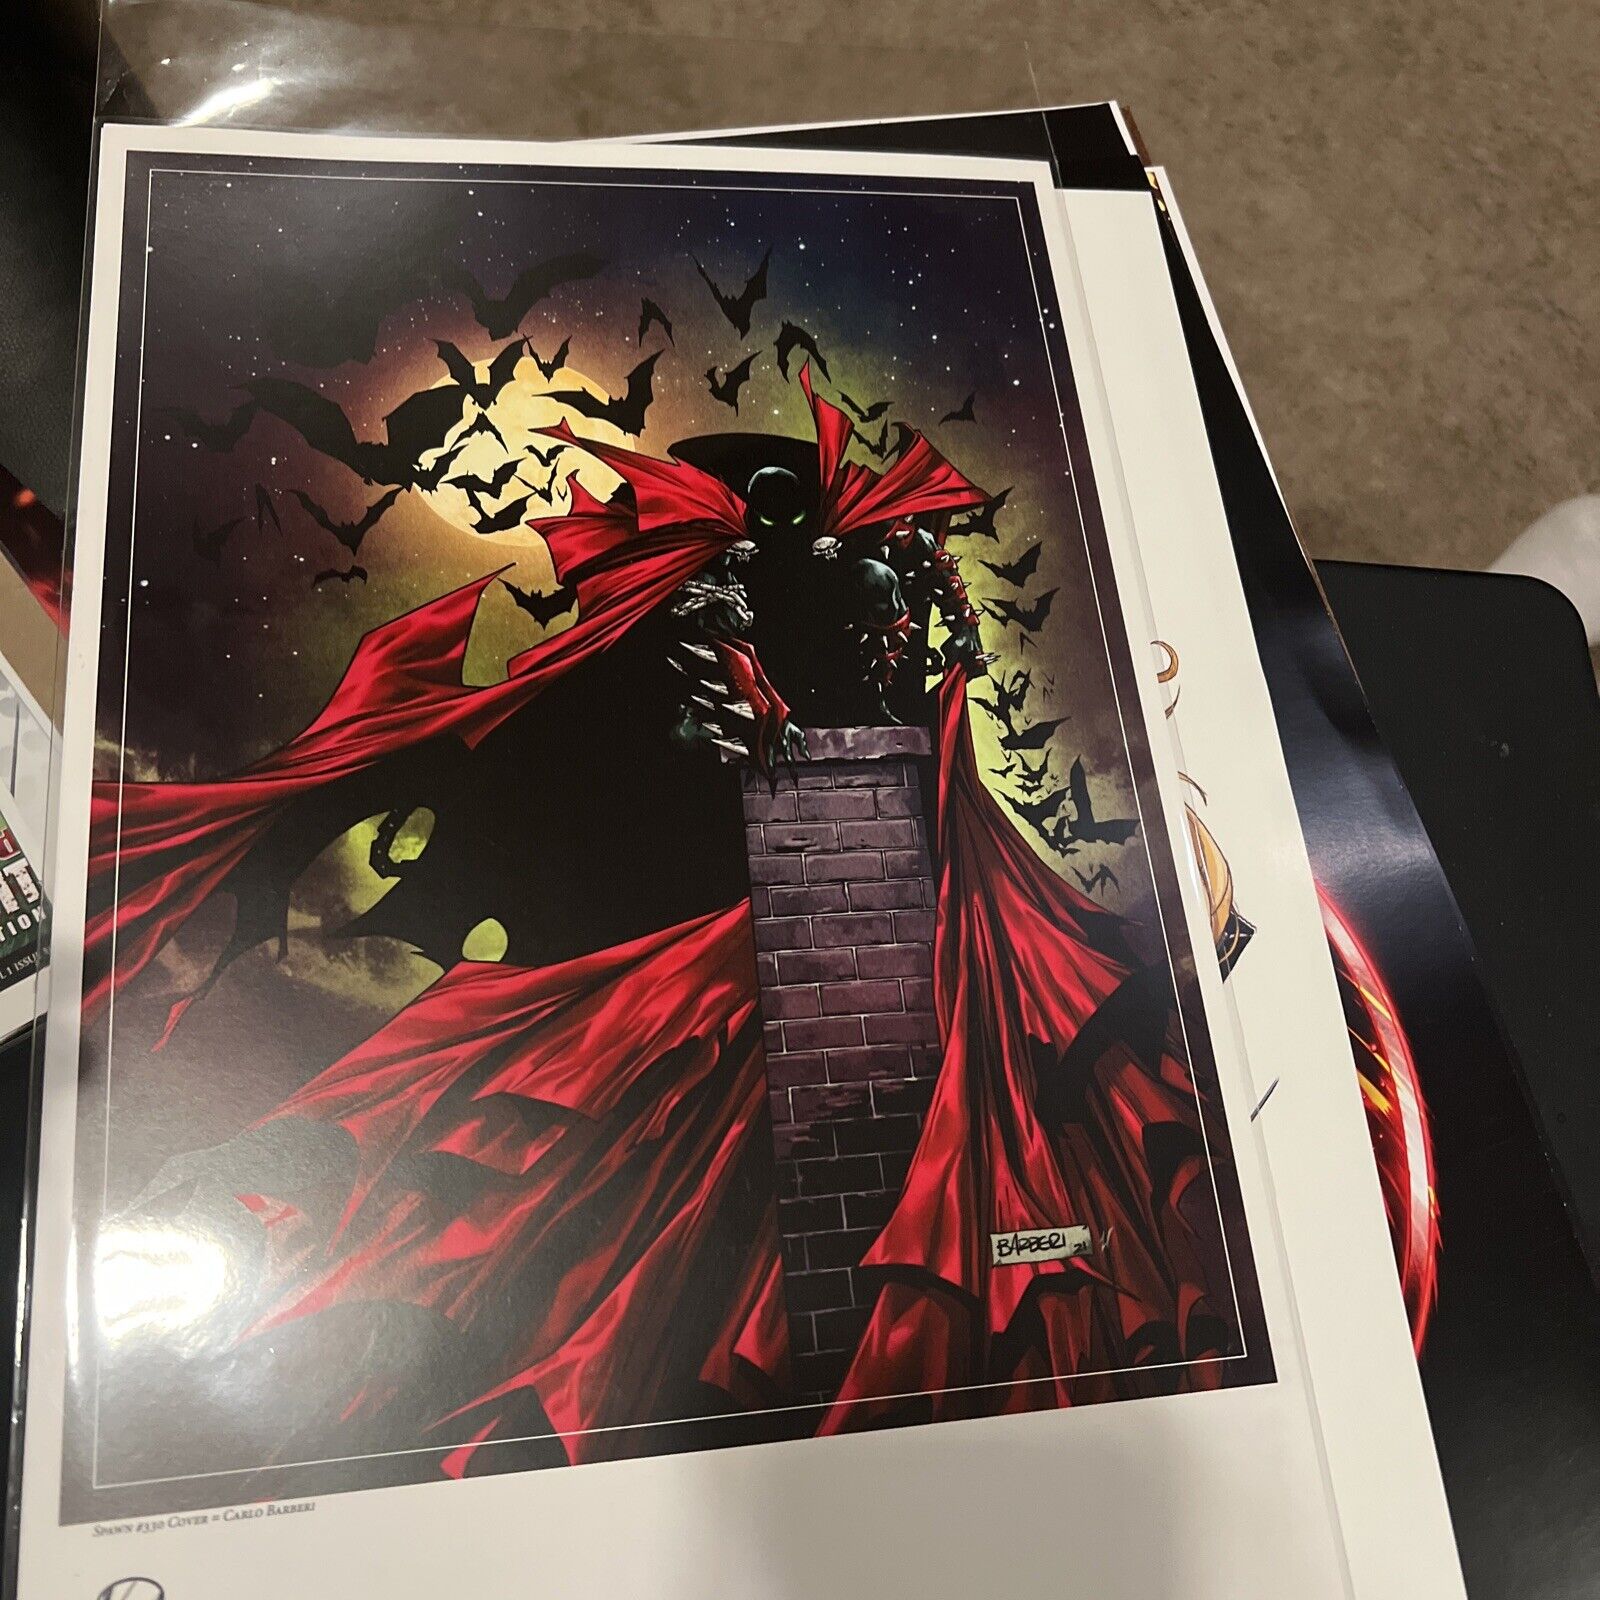 SDCC 2022 Spawn Poster #330 11x17 Print Signed By Artist Carlo Barberi